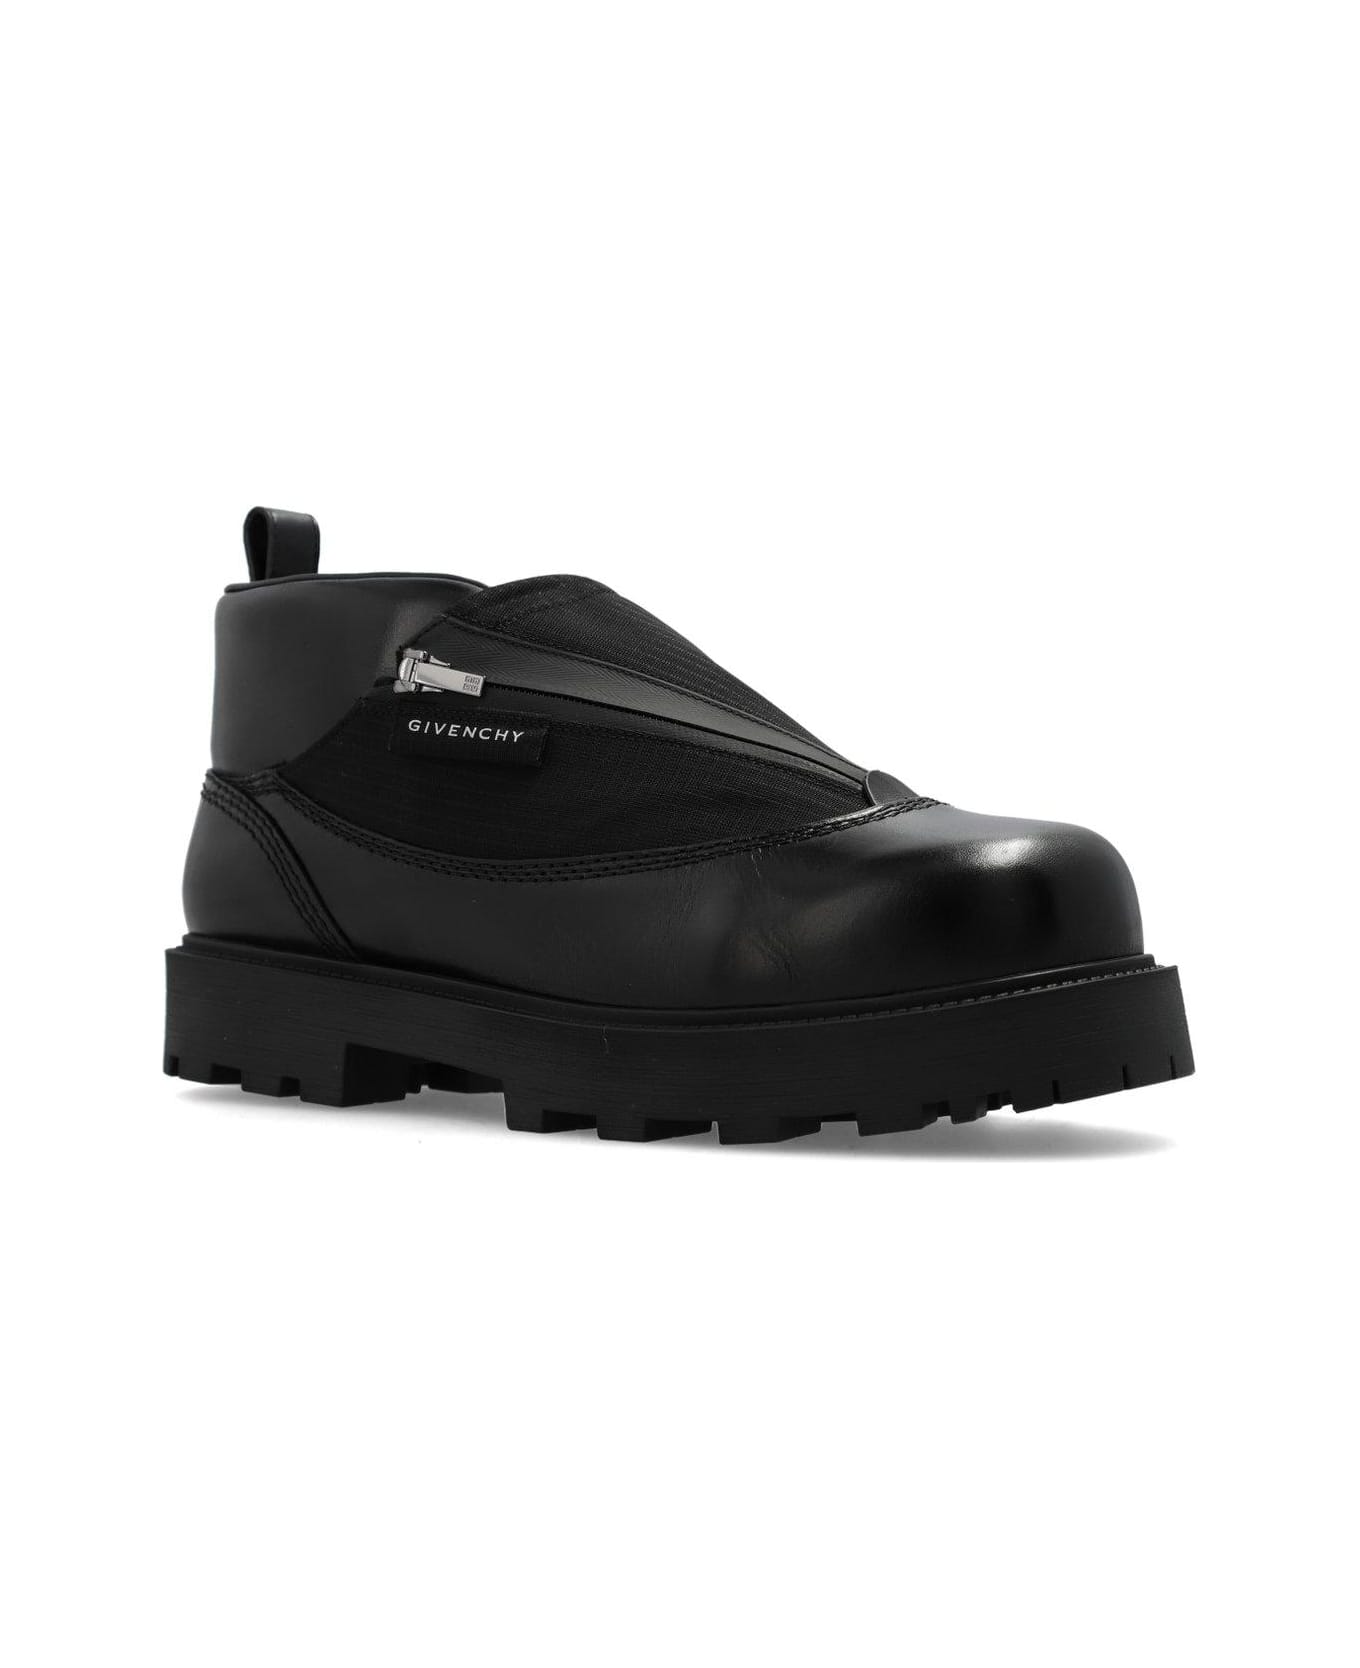 Givenchy Storm Ankle Boots - Black ブーツ